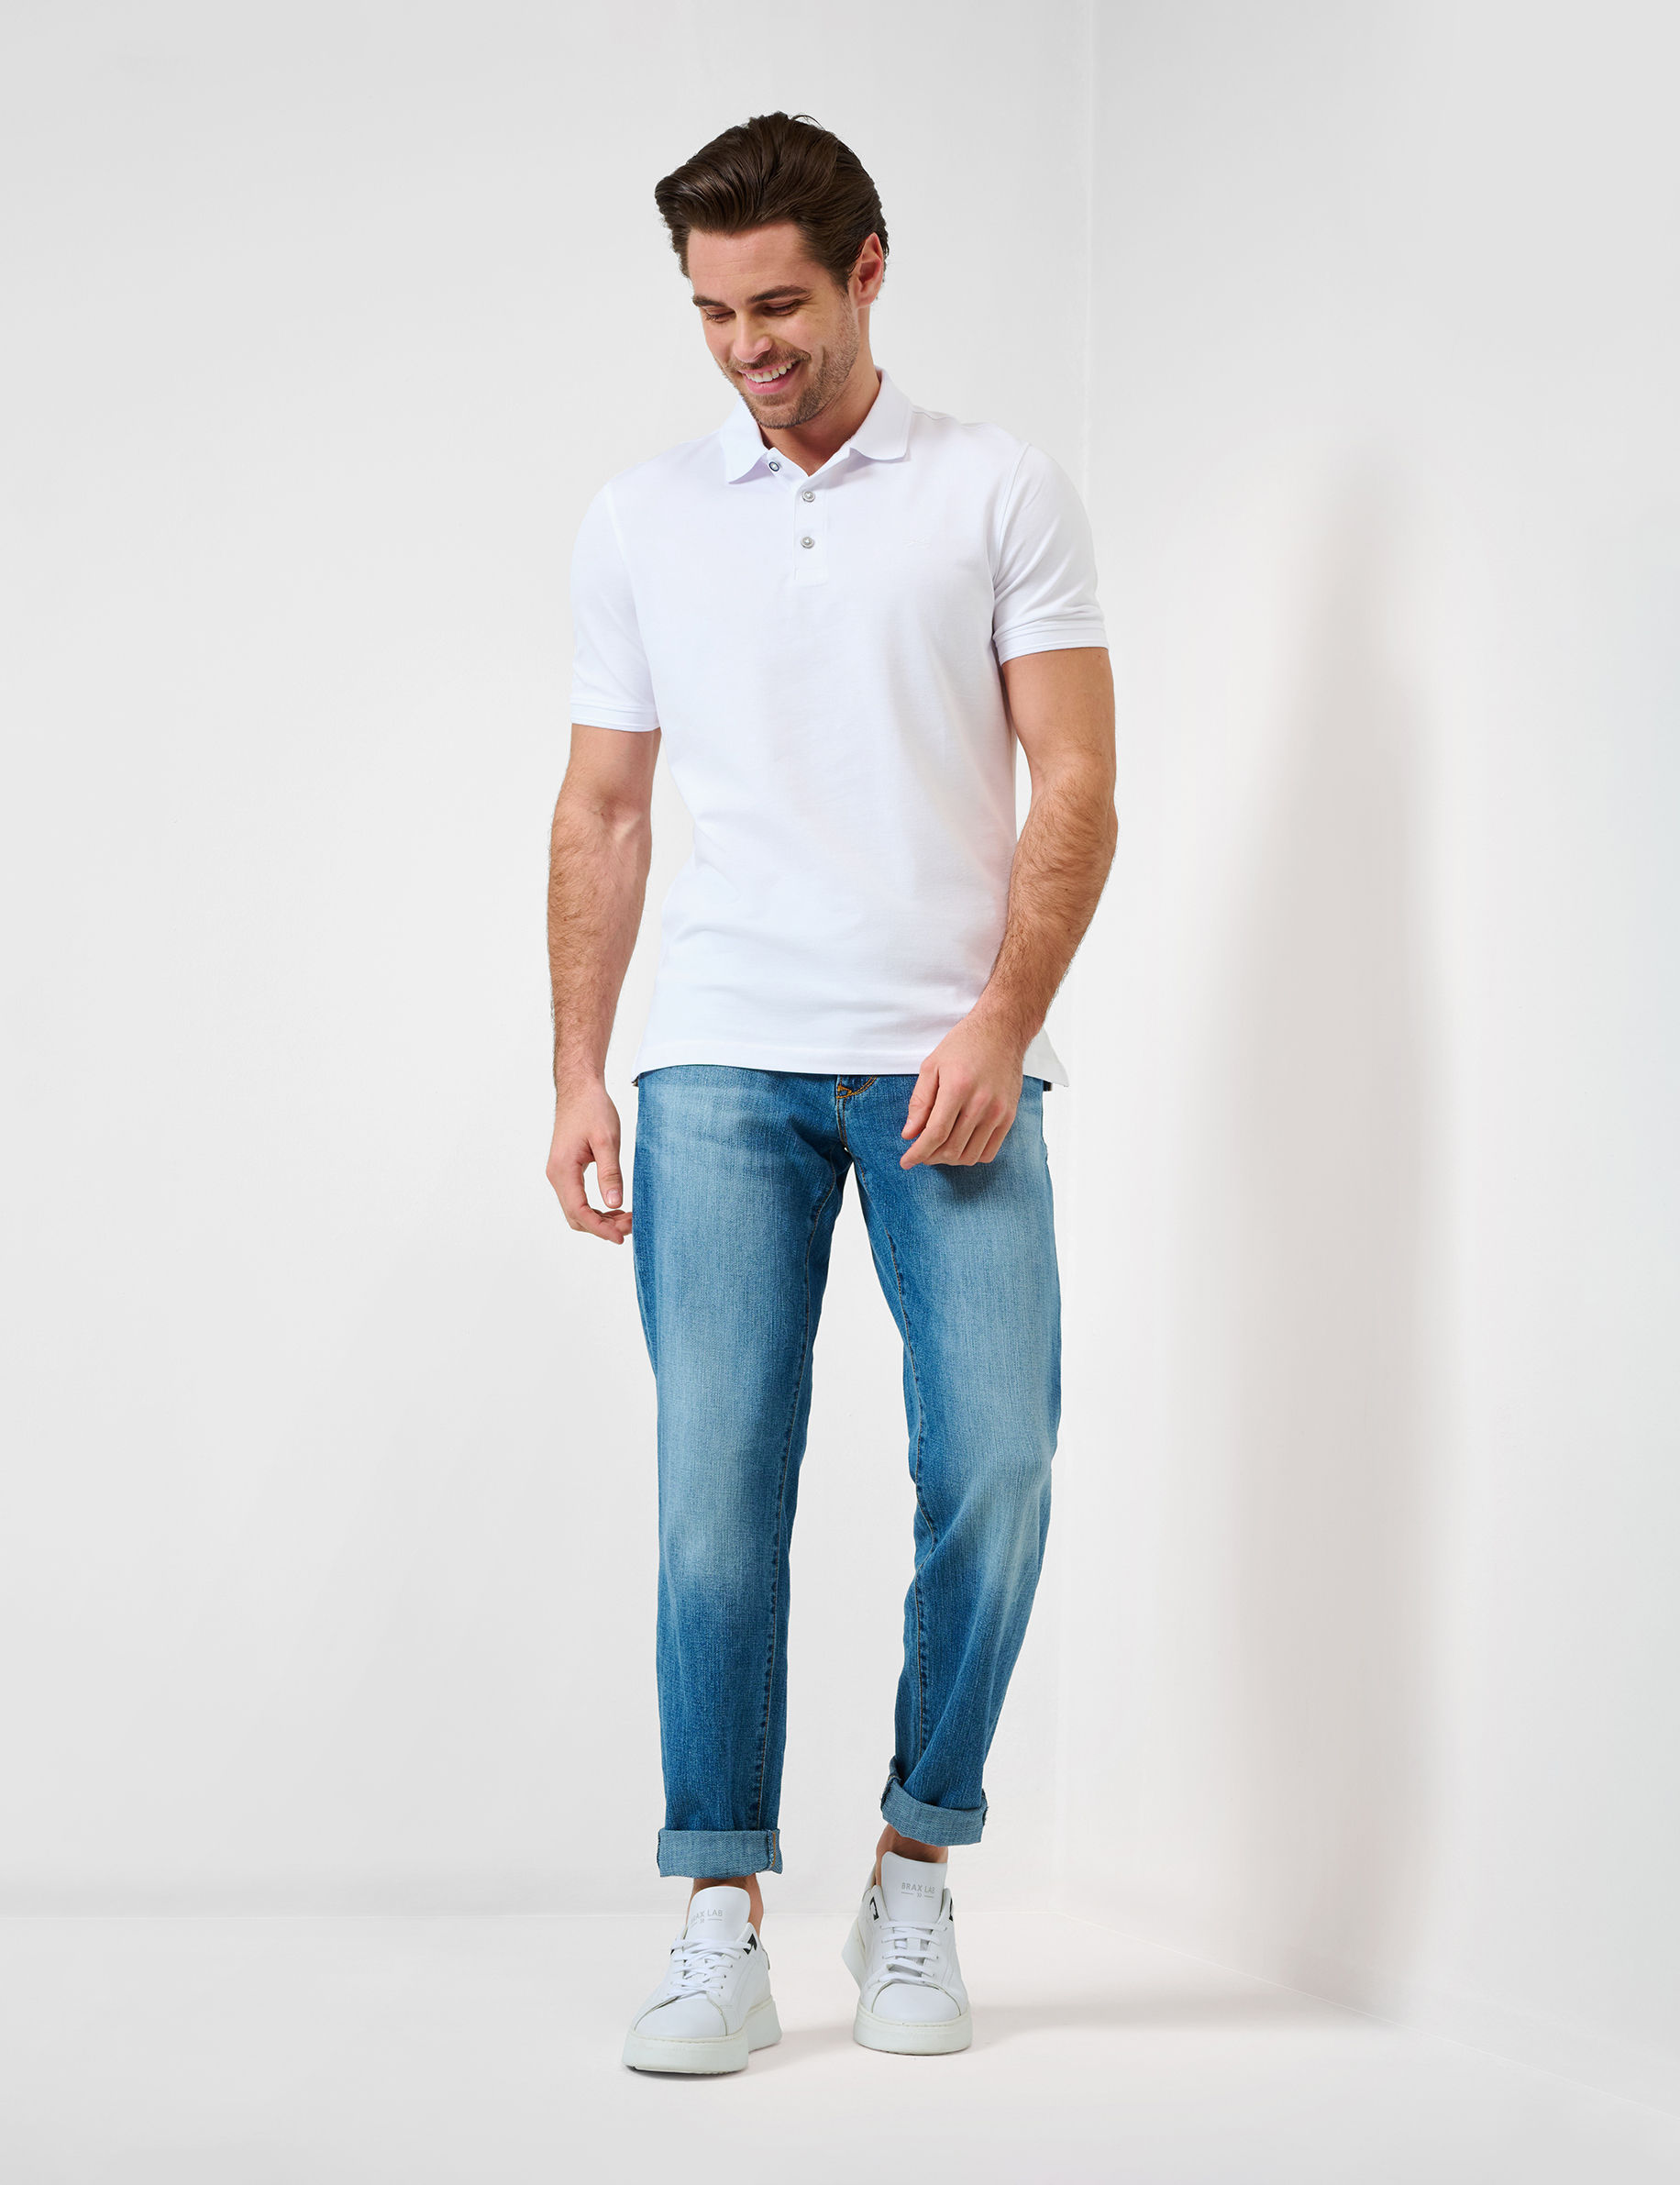 Men Style PETE white  Model Outfit